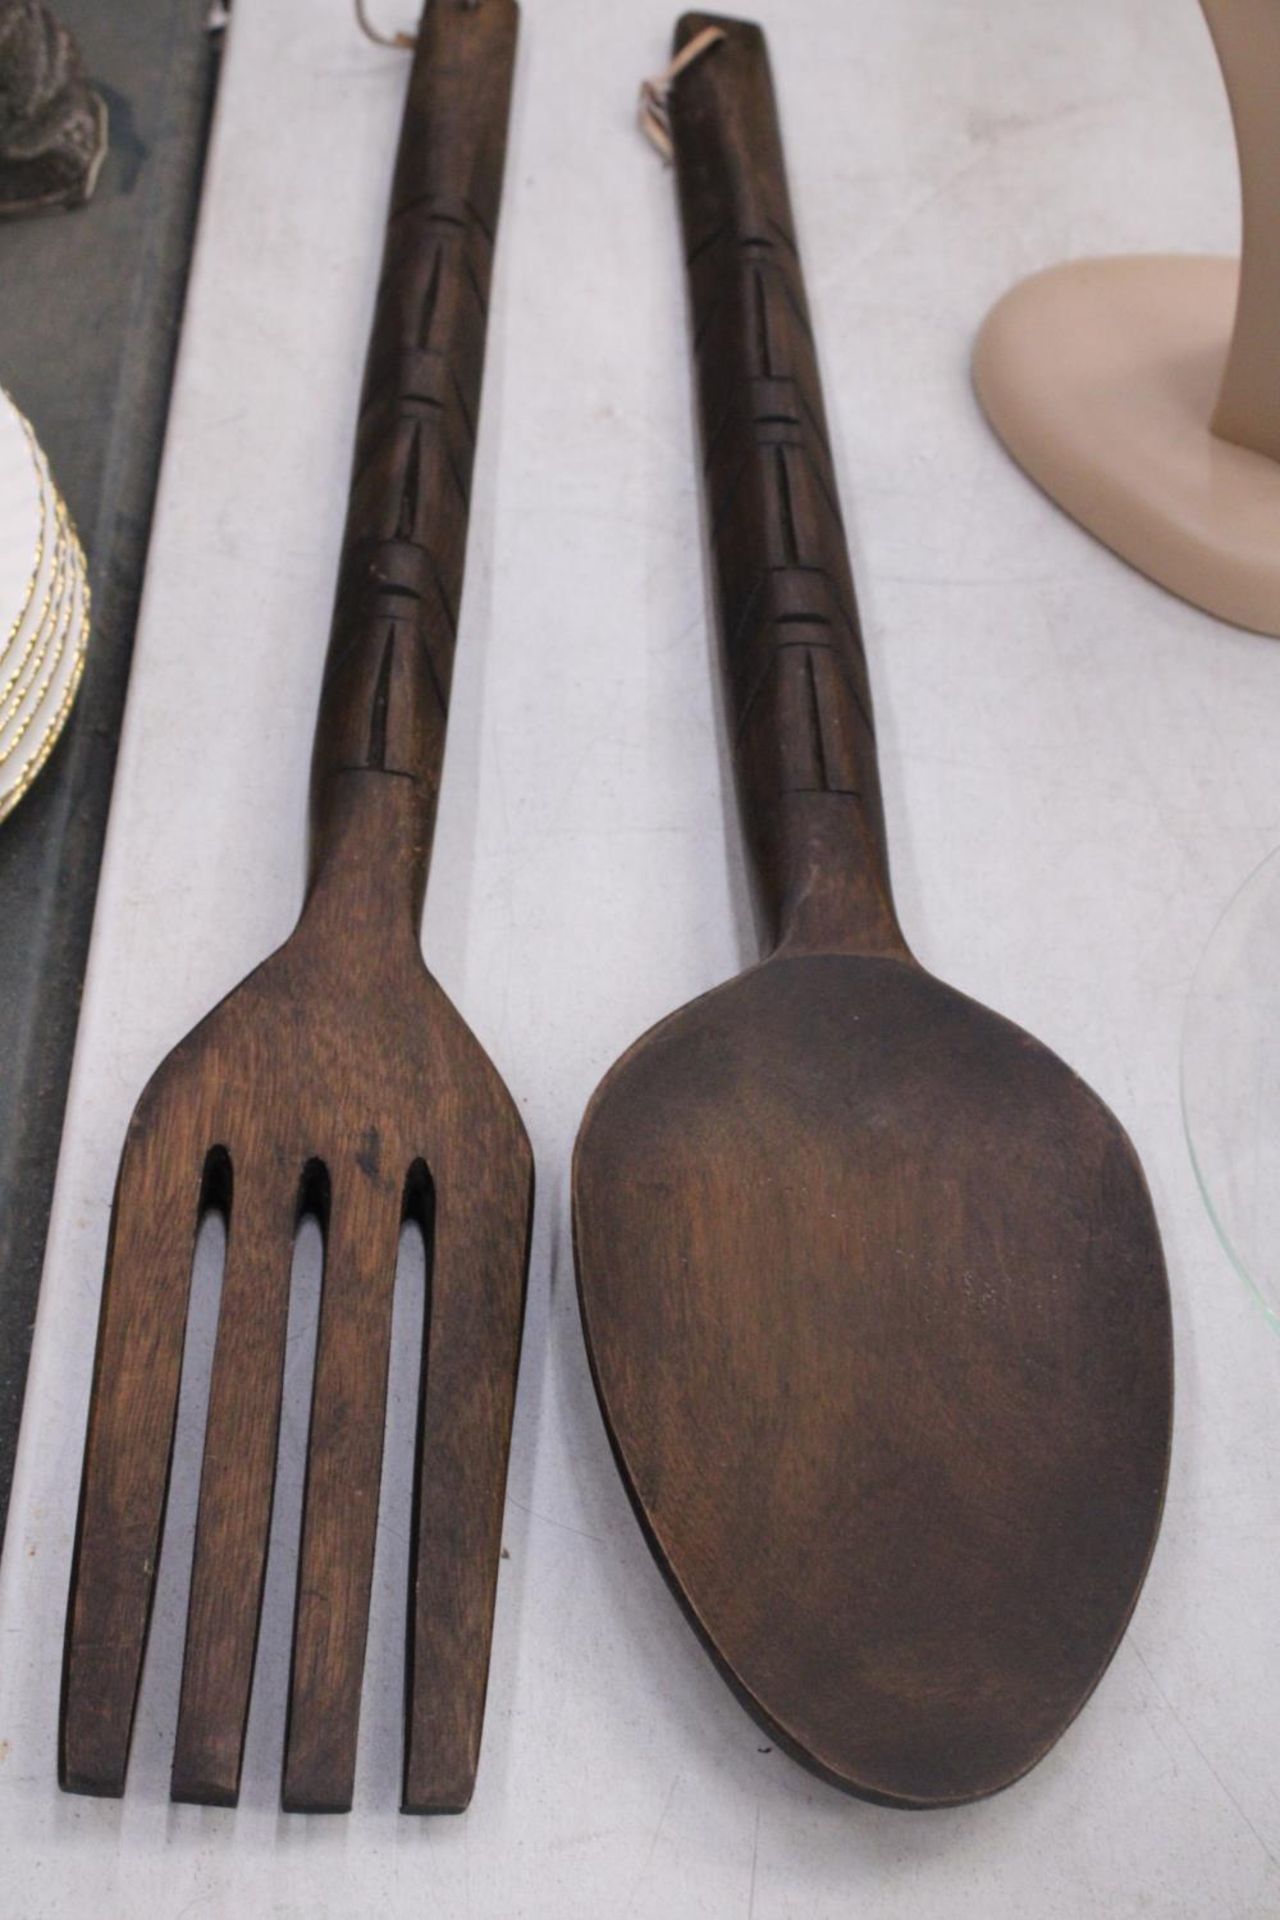 TWO LARGE WOODEN WALL DECORATIONS OF A FORK AND SPOON